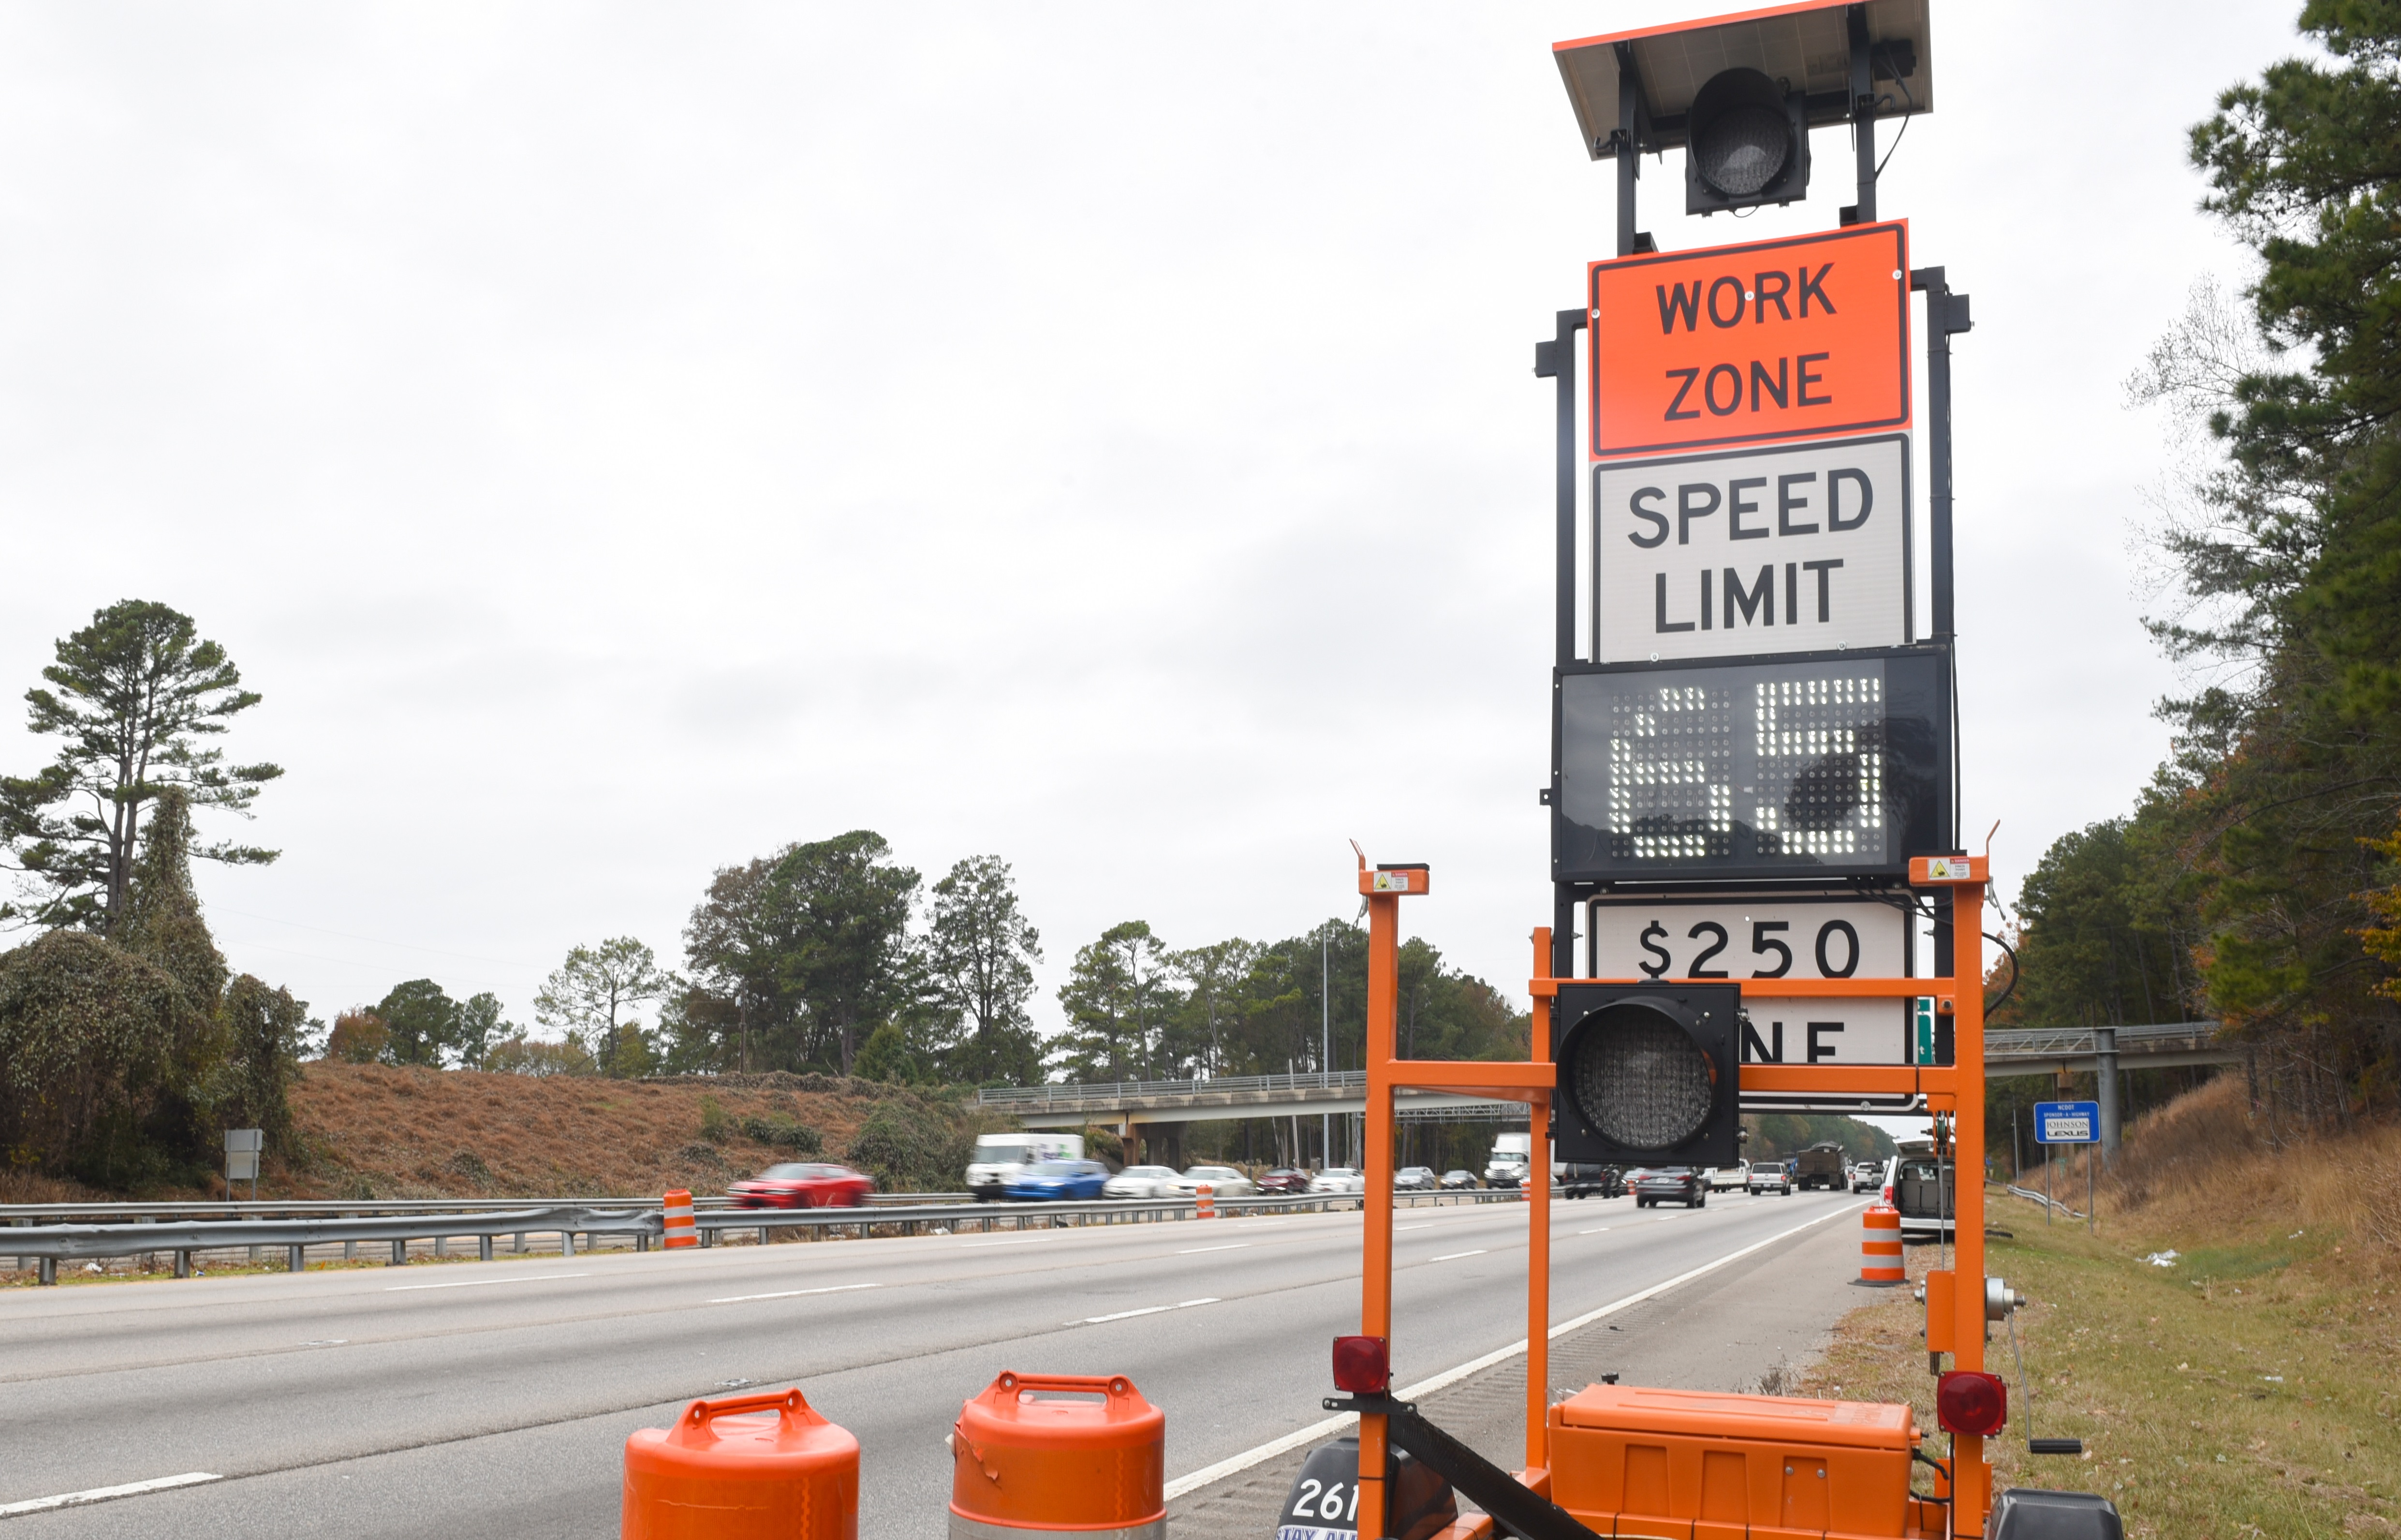 This highway work zones can be dangerous to drivers.